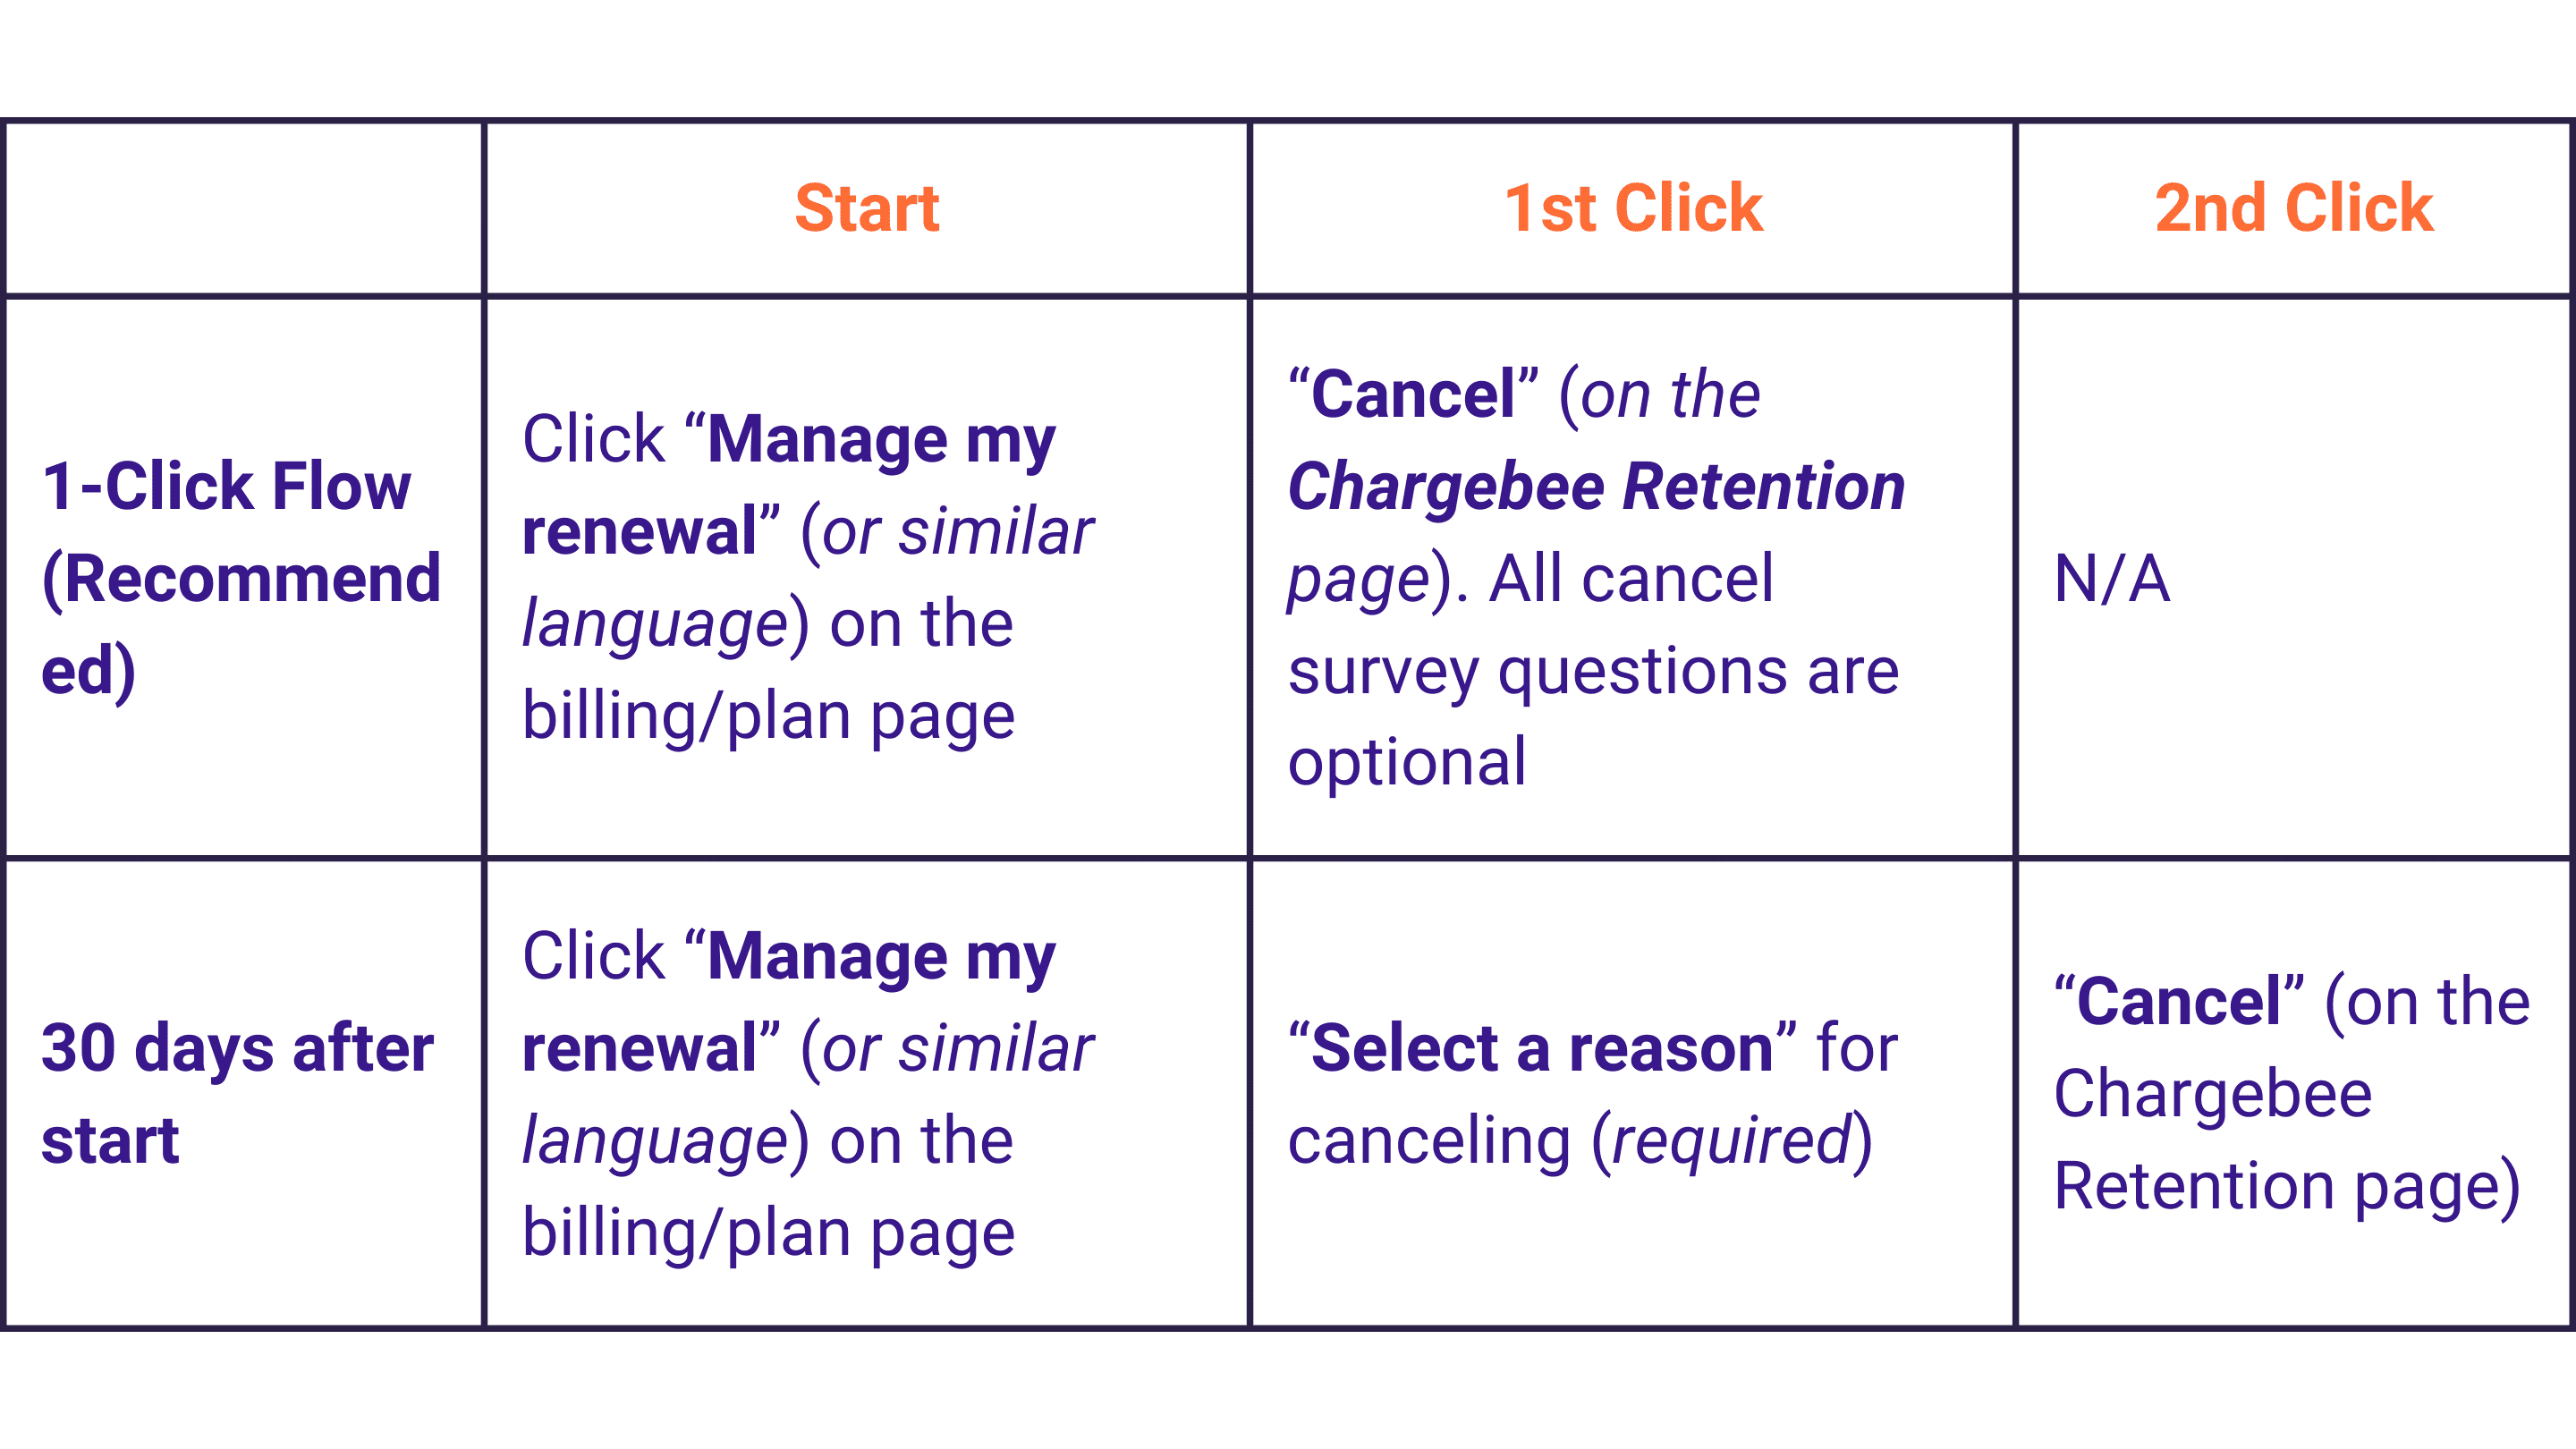 Chargebee Retention's 1-click and 2-click cancellation flows